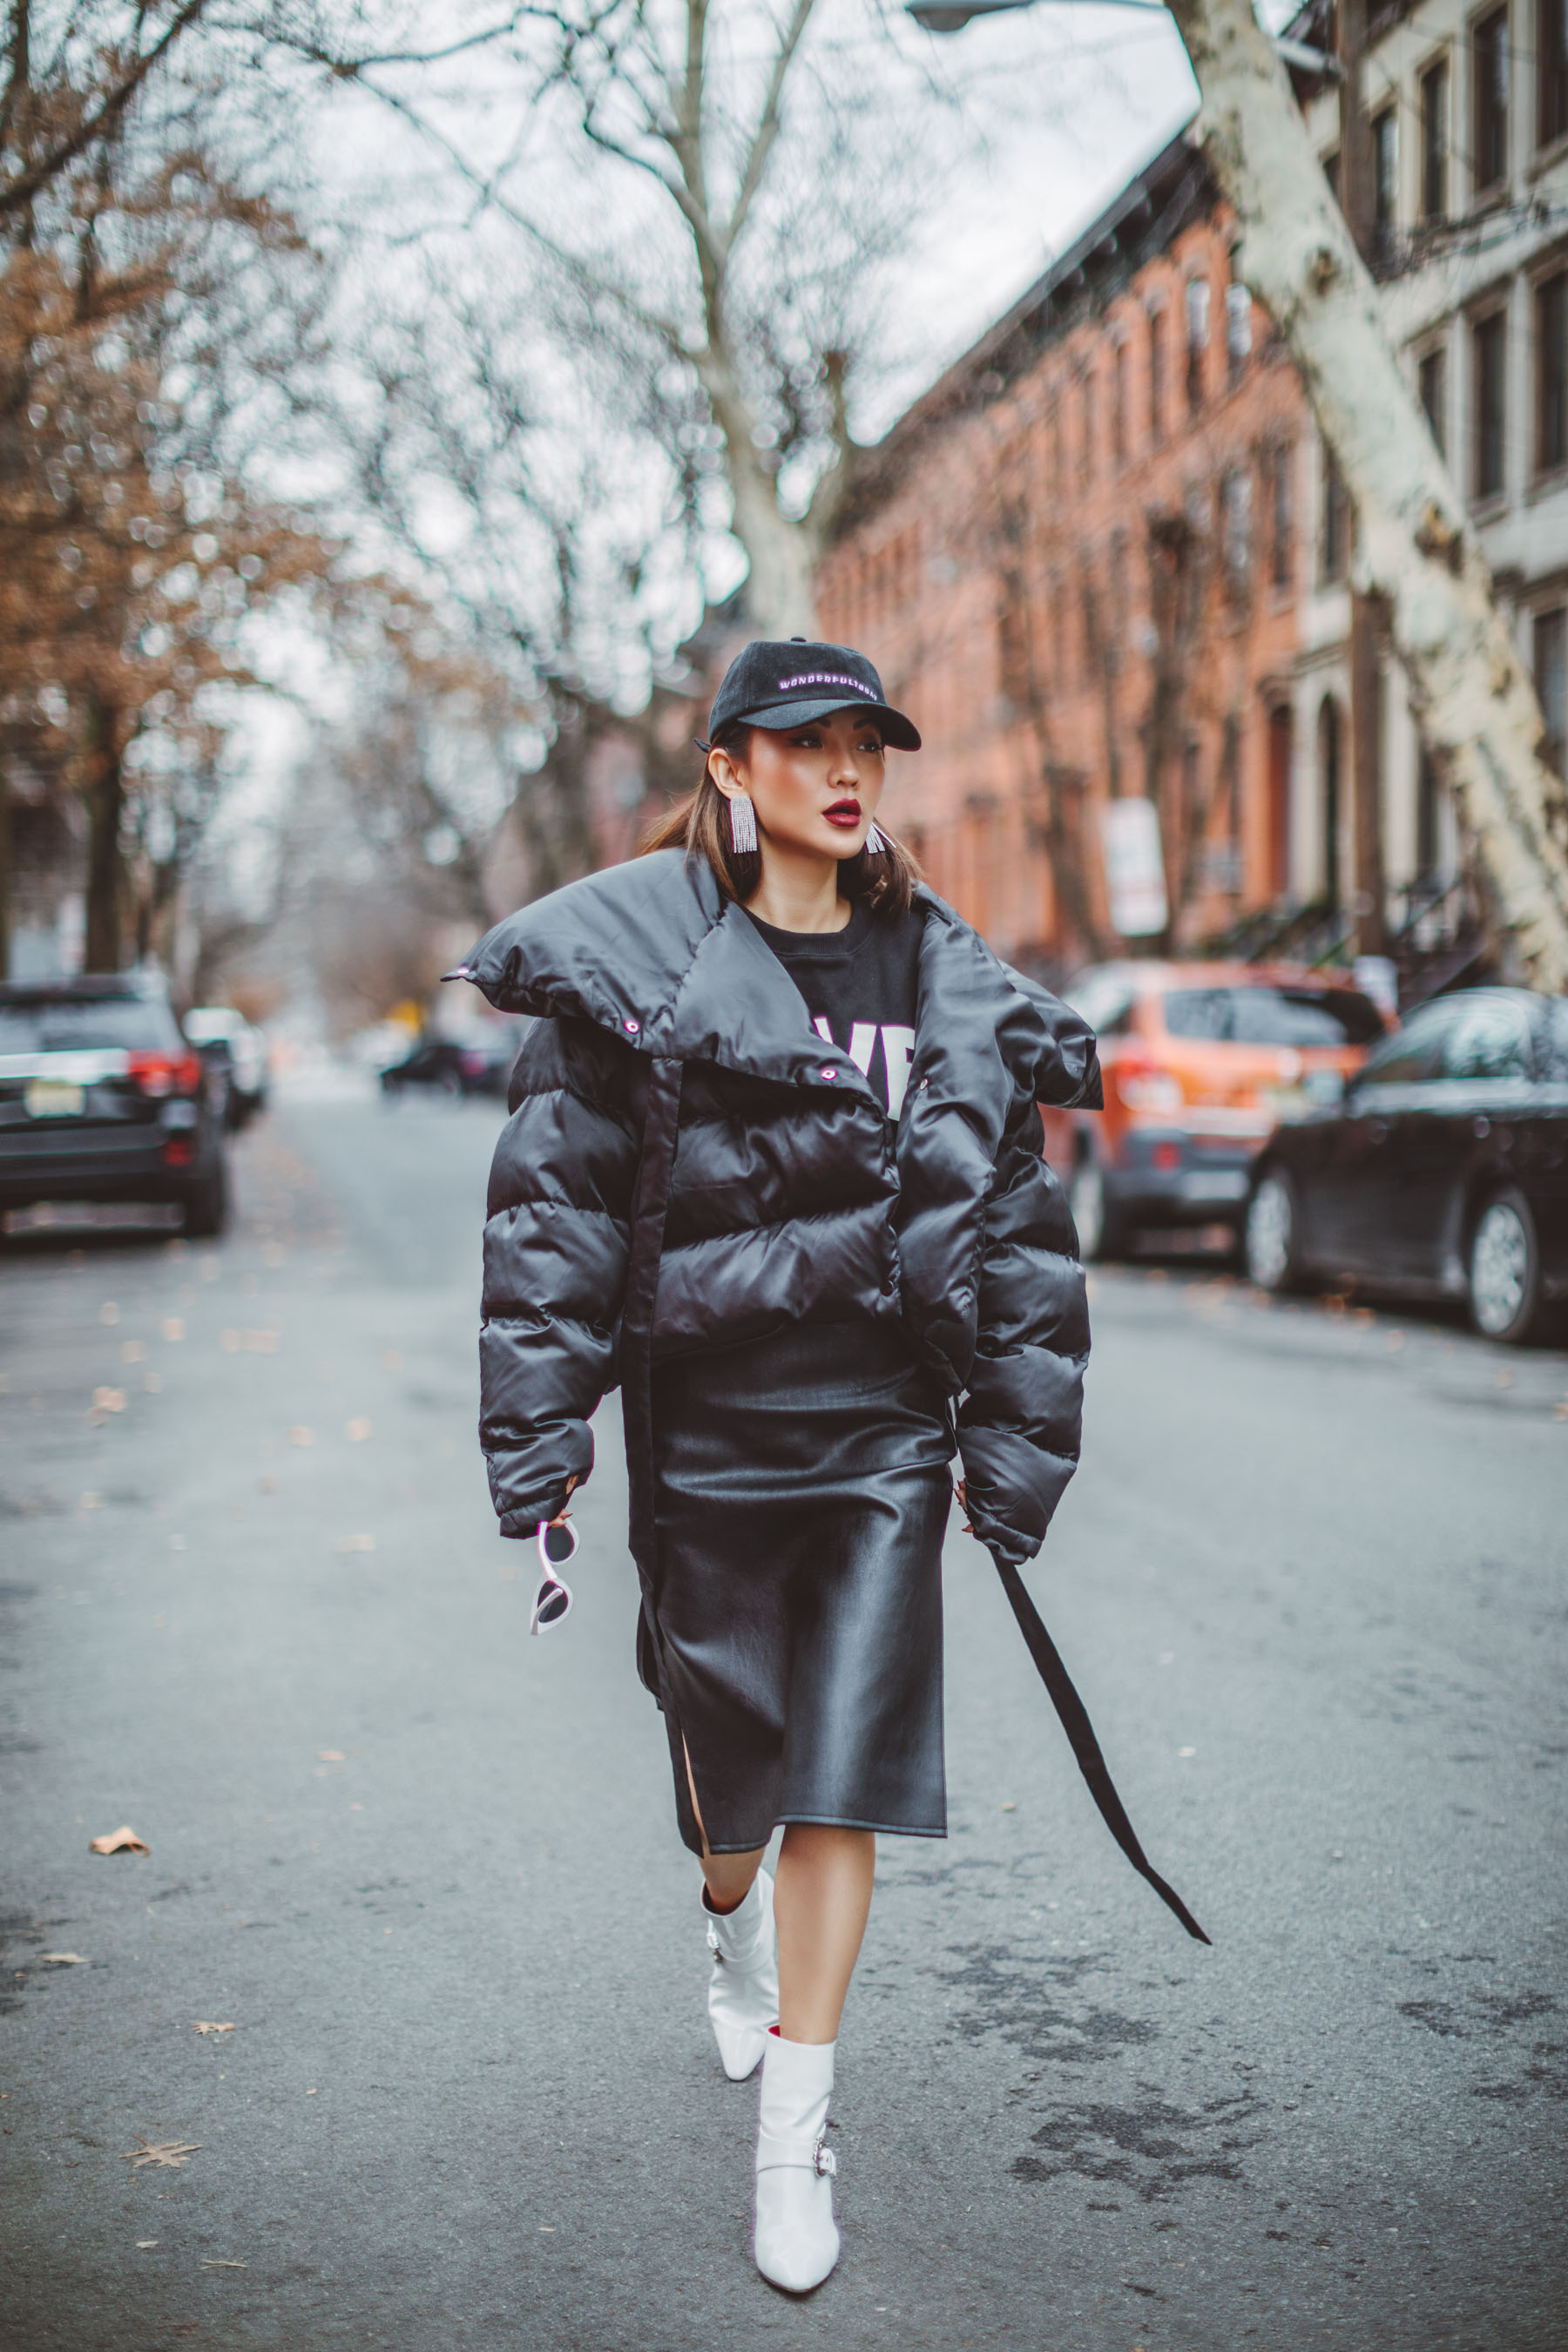 How to Look Stylish in a Quilted Puffer Jacket // Notjessfashion.com // Black quilted puffer jacket, white ankle boots, black oversized sweater, leather skirt, urban outfit, edgy fashion look, baseball cap, pink sunglasses, new york fashion blogger, asian blogger, how to dress edgy, new york street style, edgy street style